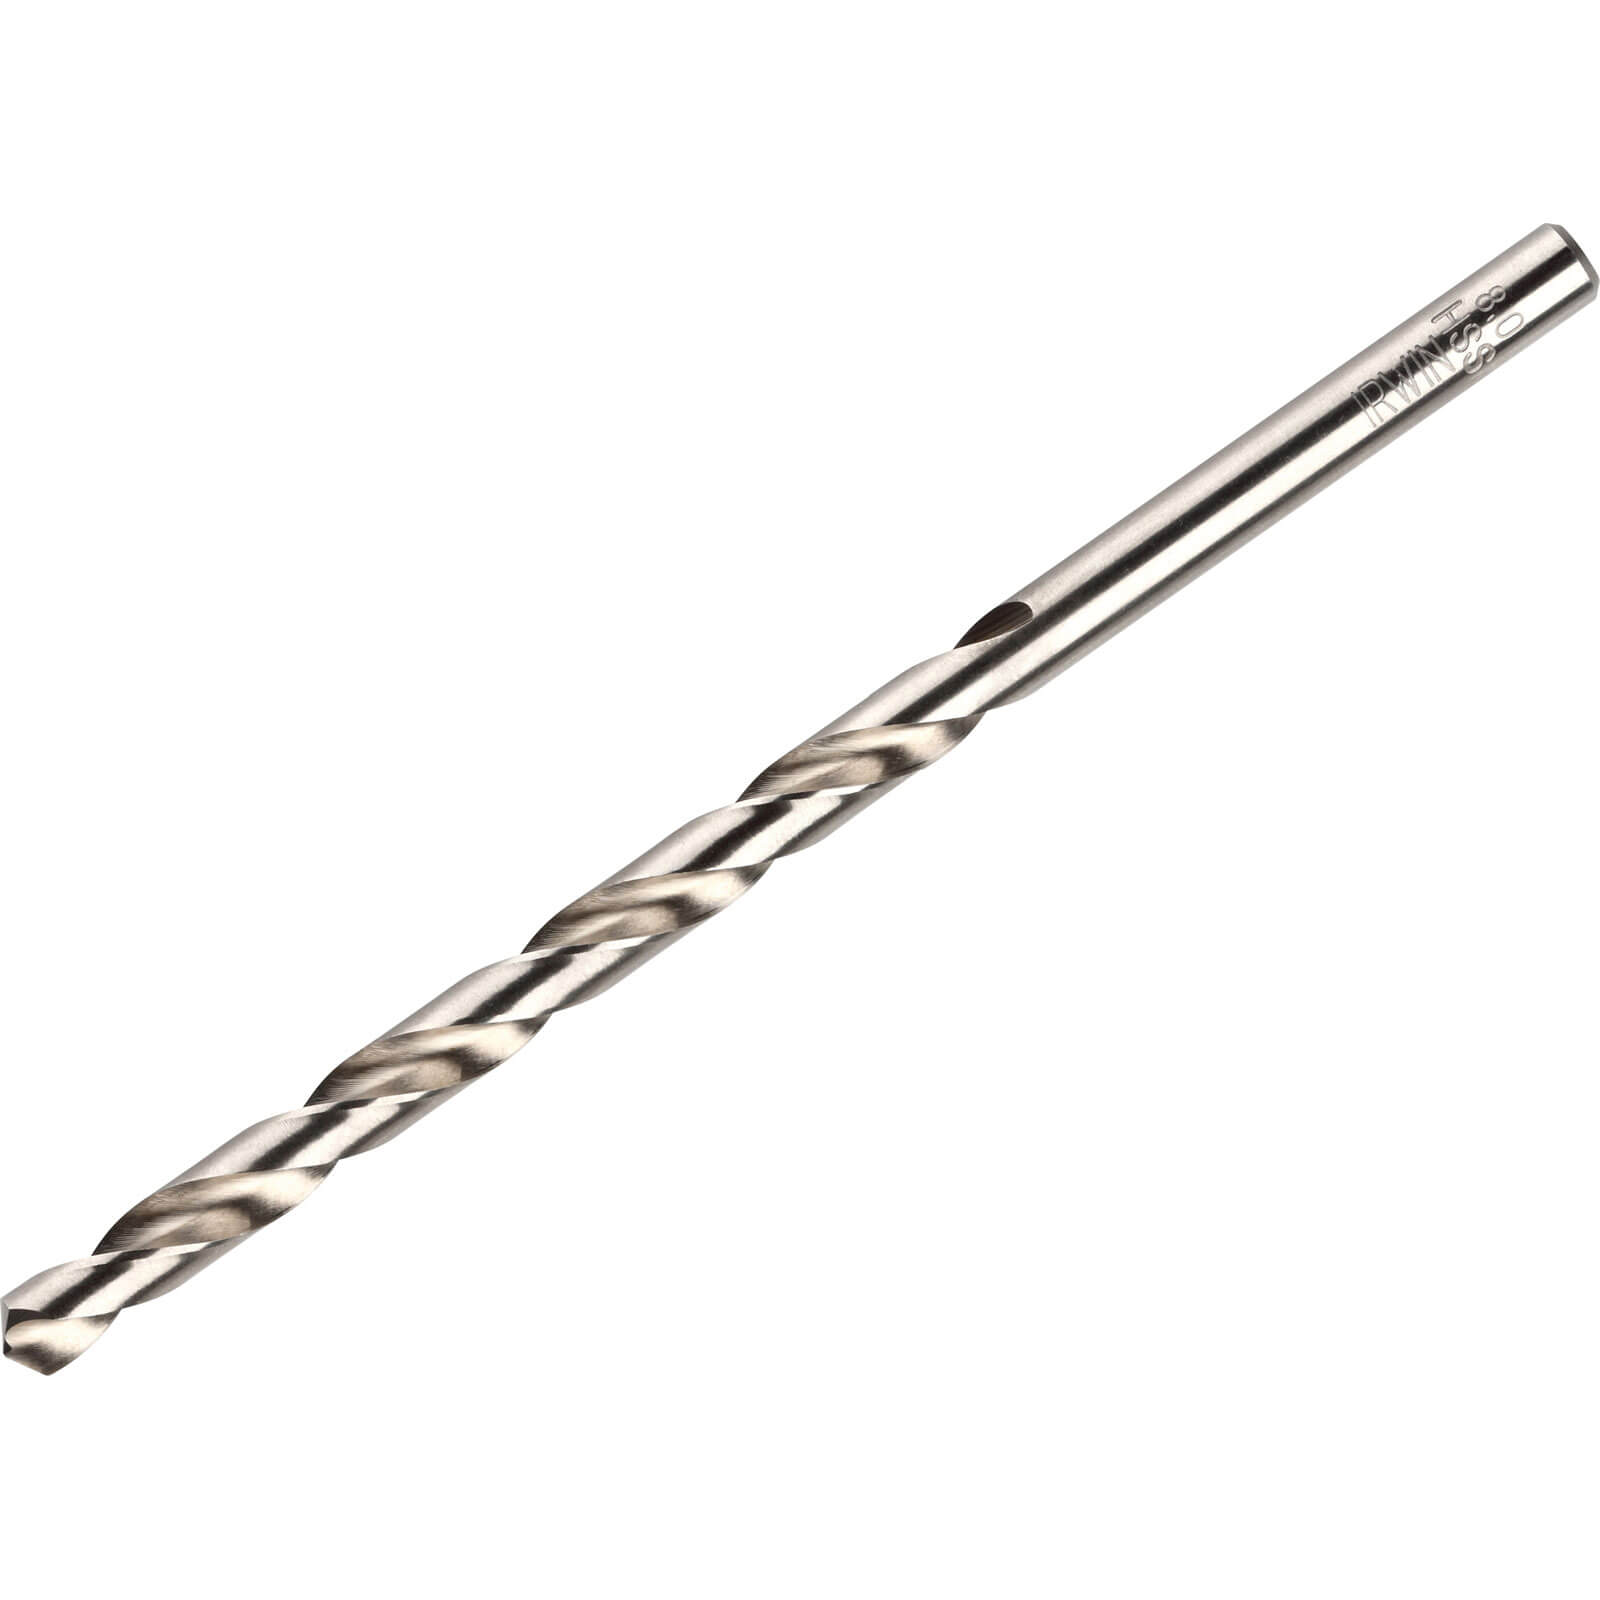 Photo of Irwin Hss Pro Drill Bits 5.5mm Pack Of 10